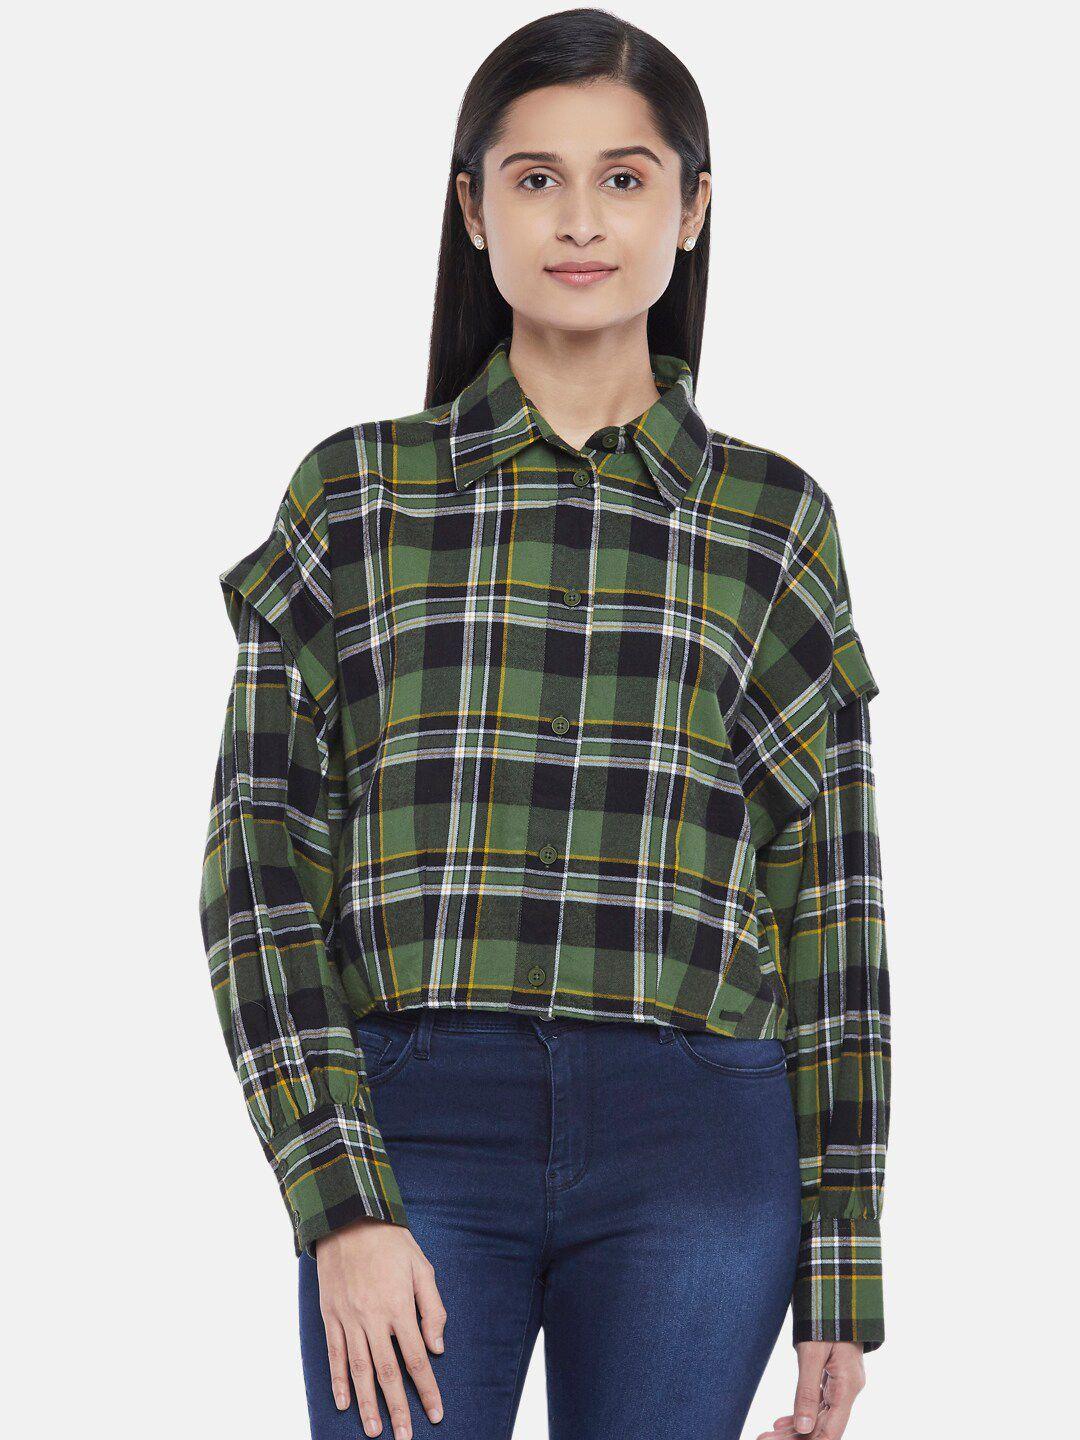 sf jeans by pantaloons women olive green tartan checked regular fit casual shirt